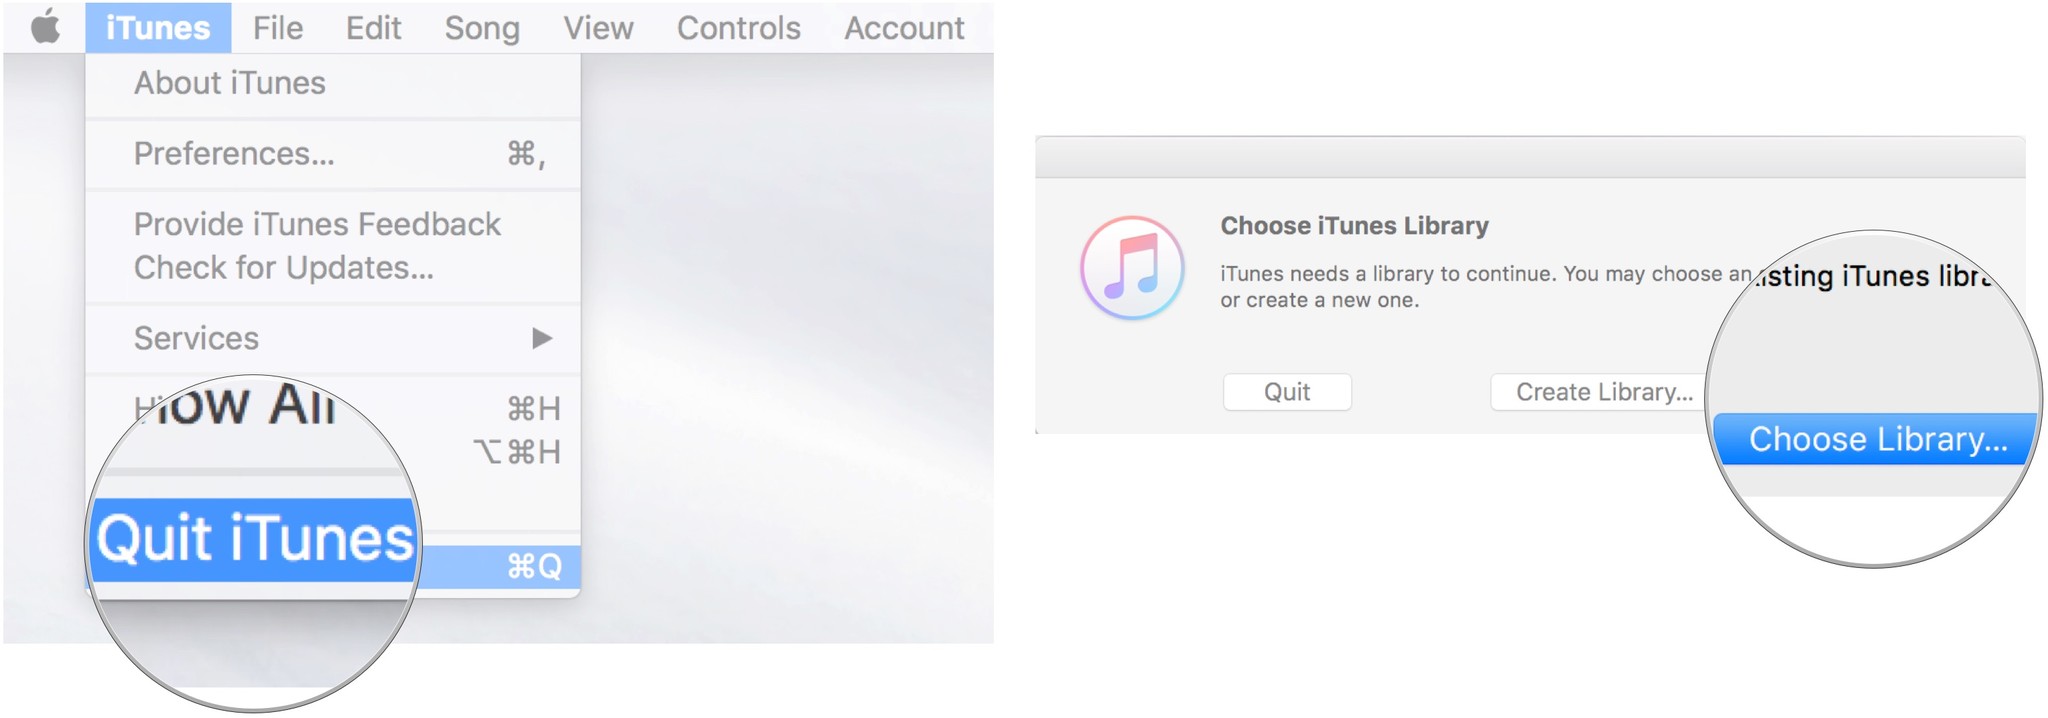 Quit iTunes, then launch iTunes while holding the Option key, then click Choose Library